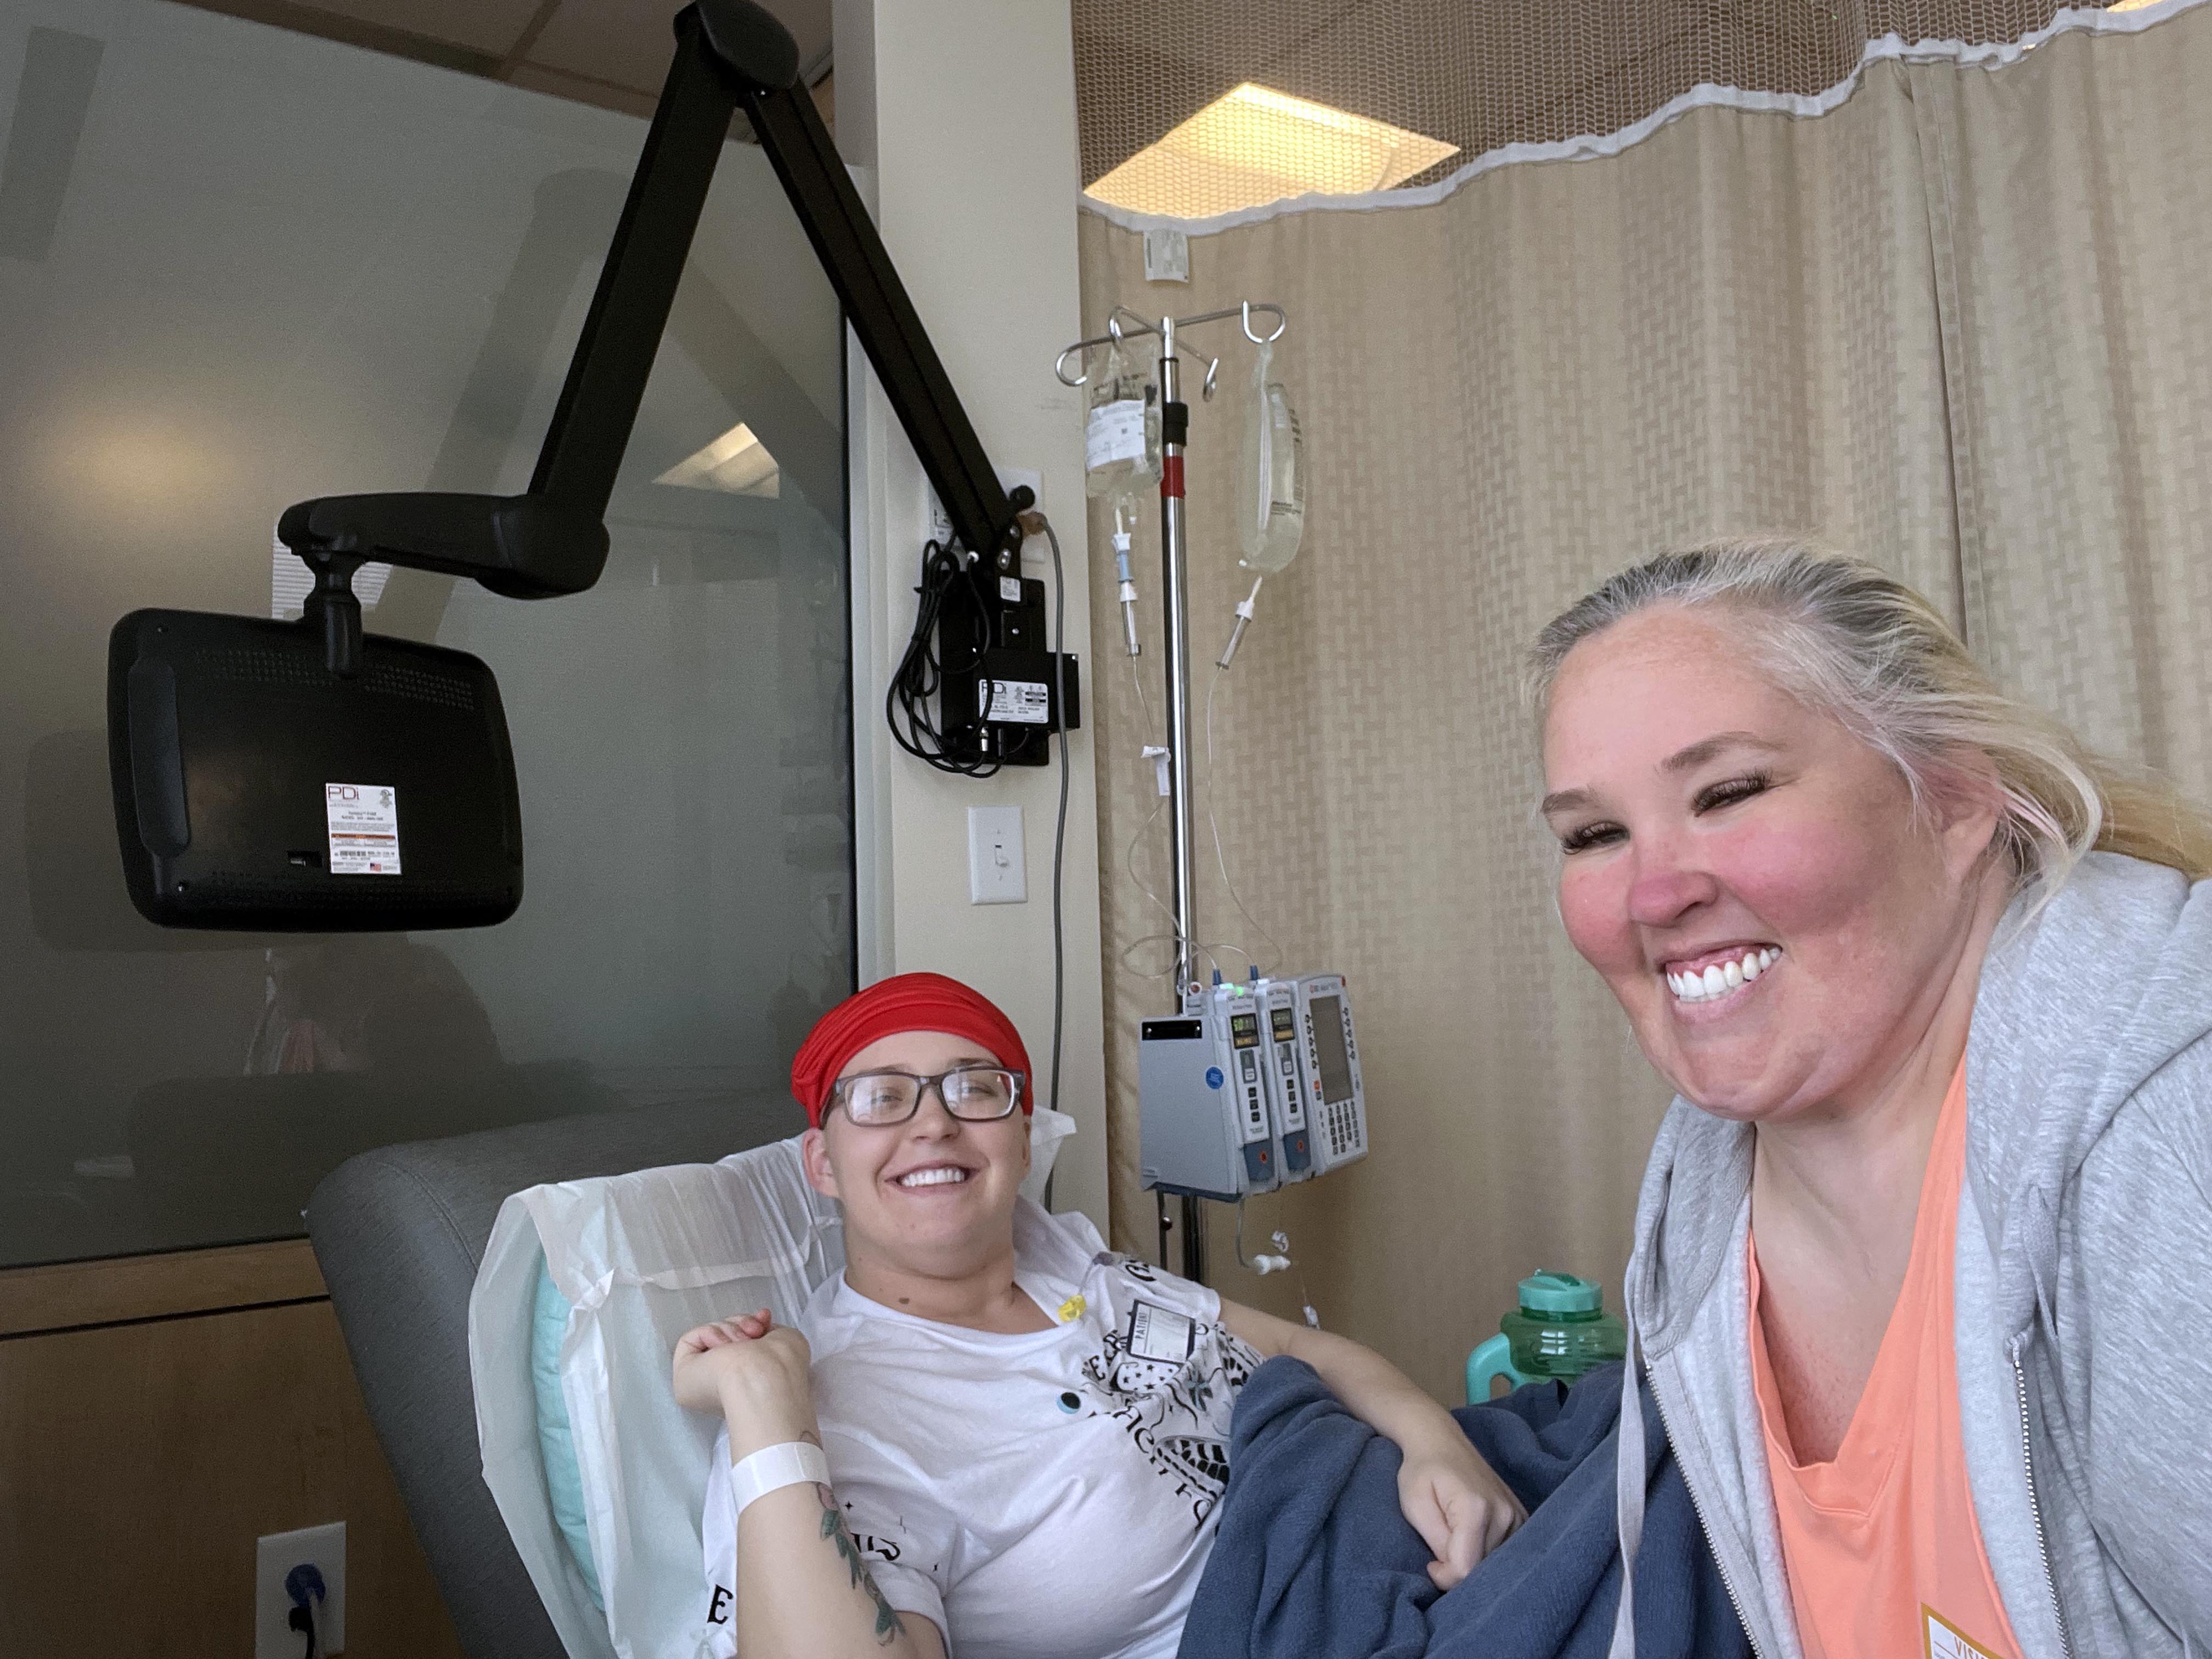 Fans will get a glimpse at Mama June's struggles, including the death of her daughter Anna Cardwell, in Mama June: Family Crisis